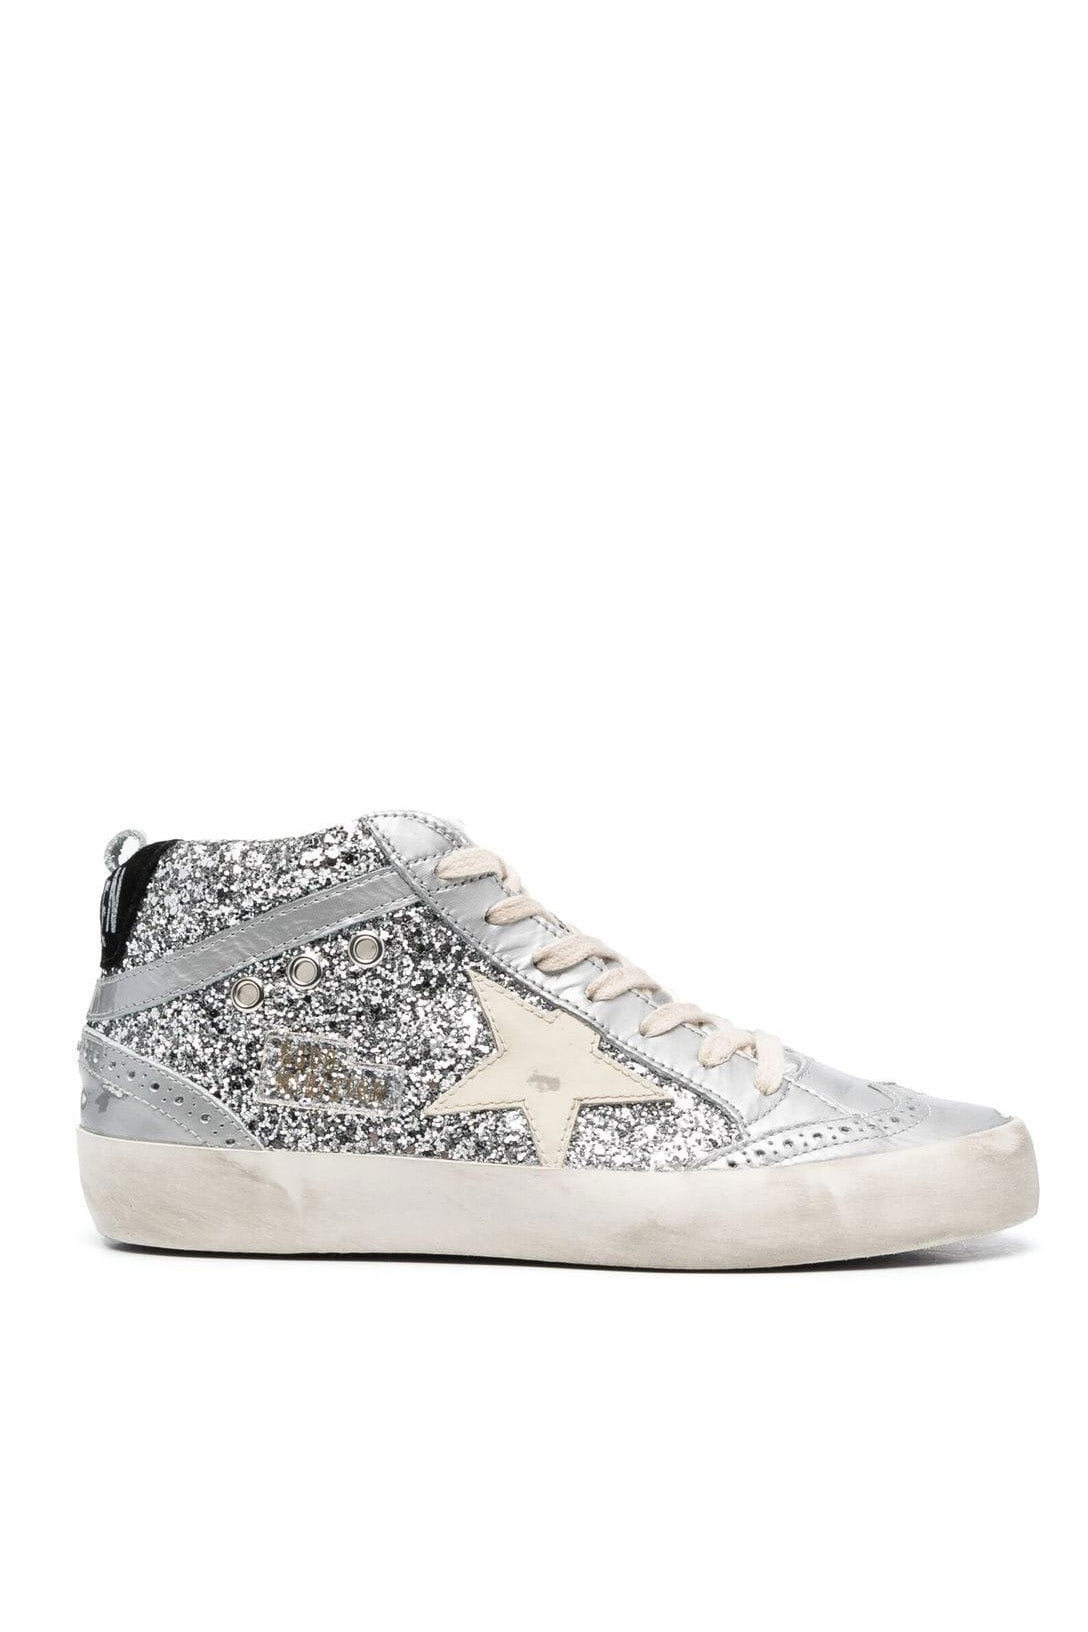 Mid Star Sneakers, silver glitter & laminated leather